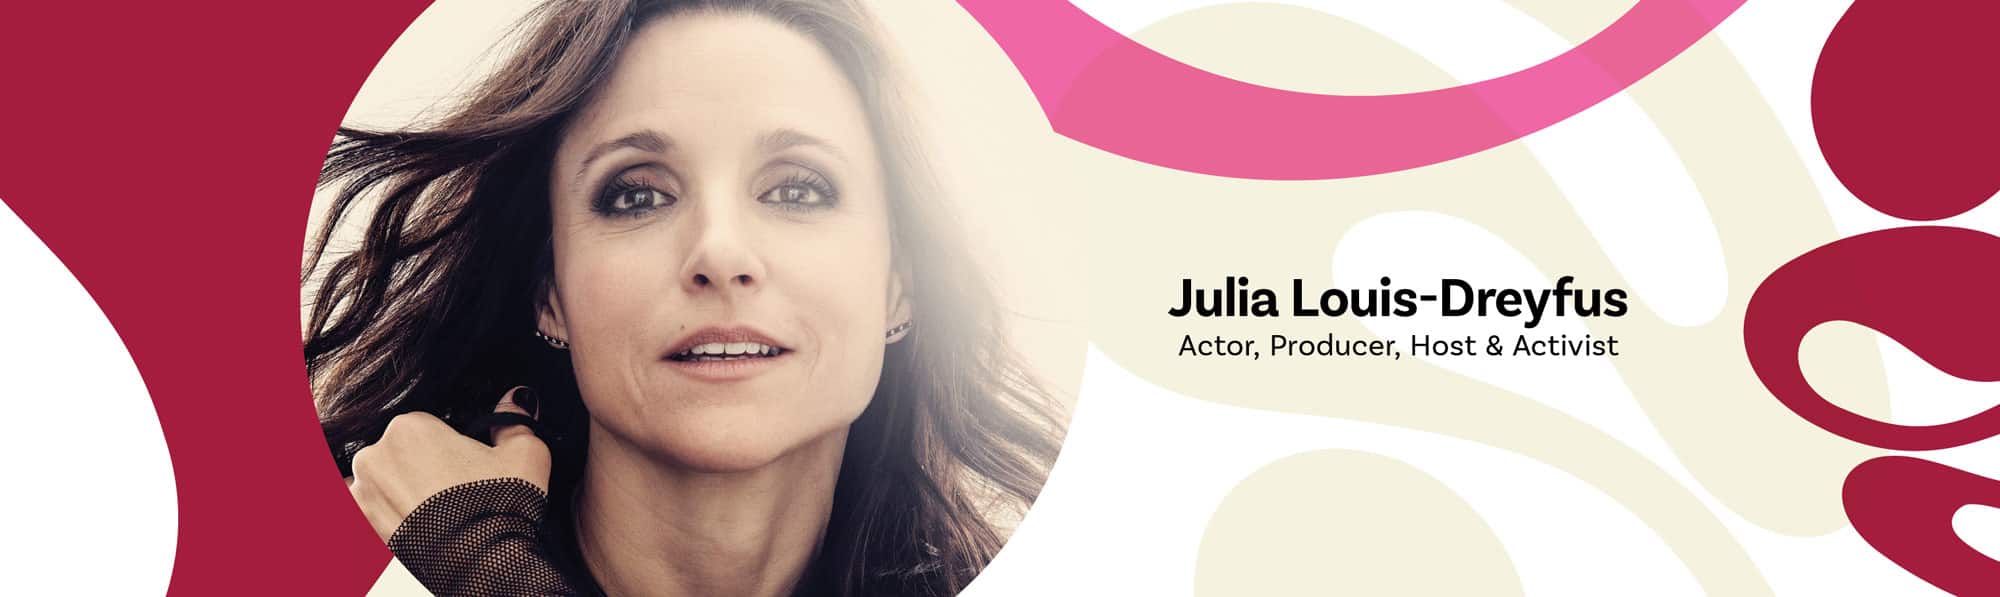 Join Julia Louis-Dreyfus at the Texas Conference for Women on October 2nd in Austin, TX!